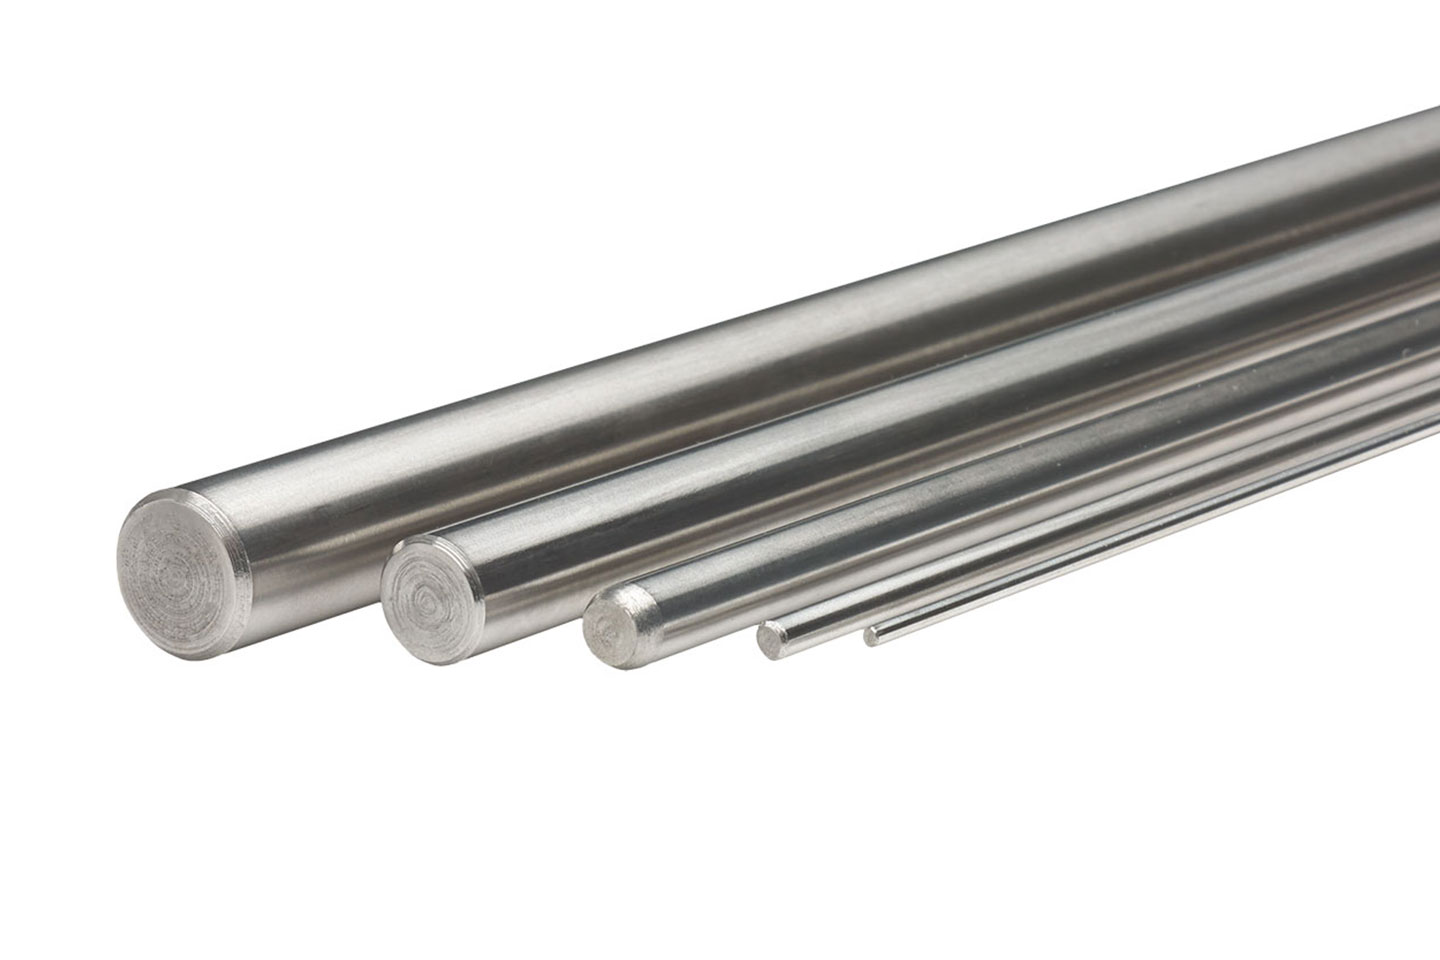 Plus Metals - AMS 5537 Round Bar Suppliers in India